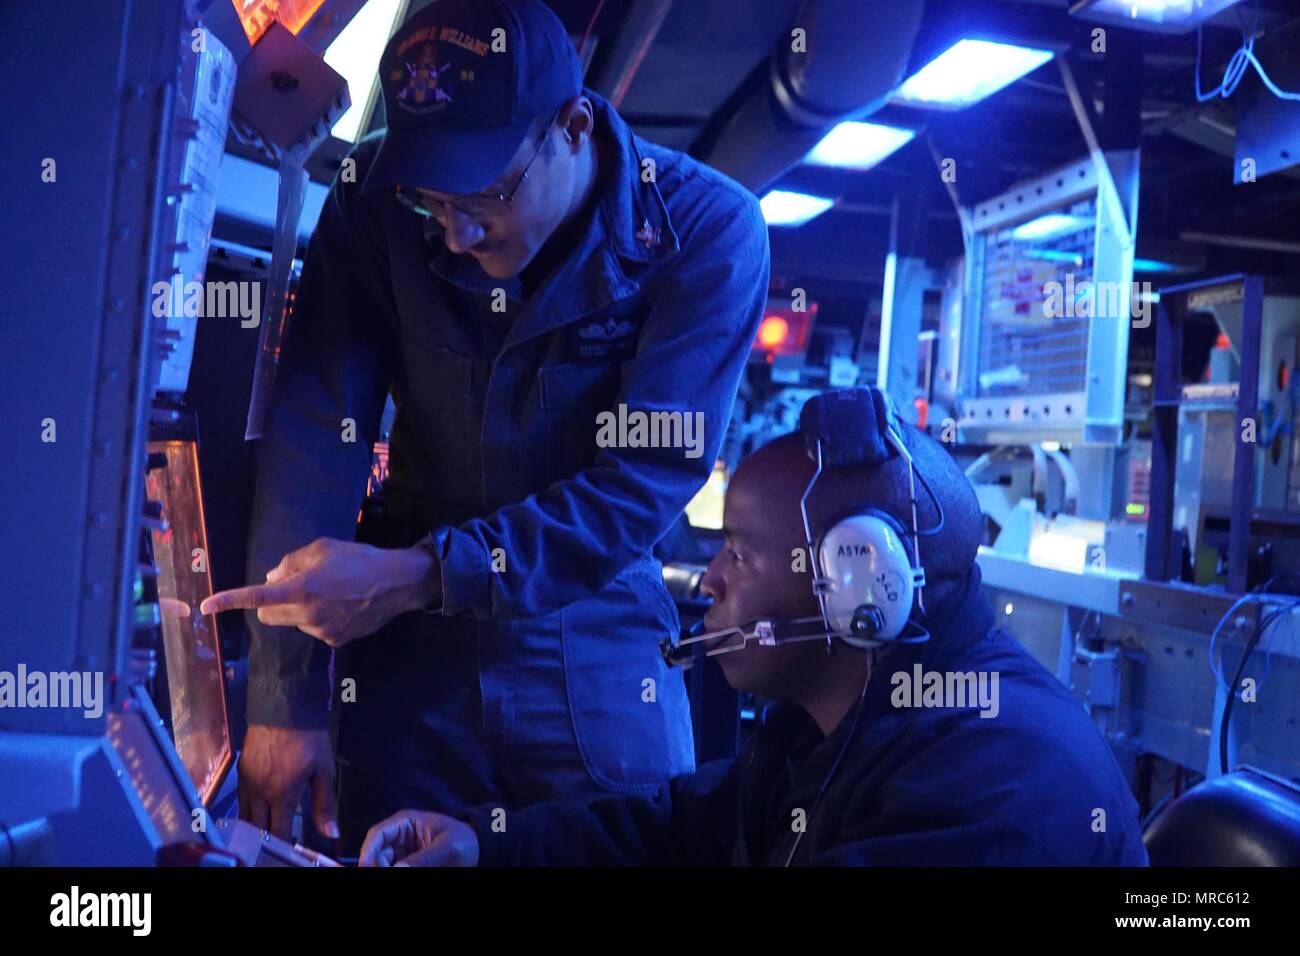 170601-N-QX001-001  ATLANTIC OCEAN (June 1, 2017) Operations Specialist 2nd Class Kenneth Davis, from Johnston, South Carolina, discusses helicopter operations with Operations Specialist 1st Class Steven Gross, from Baltimore, aboard the Arleigh Burke-class guided-missile destroyer USS James E. Williams. James E. Williams, homeported in Norfolk, is on a routine deployment to the U.S. 6th Fleet area of operations in support of U.S. national security interests in Europe. (U.S. Navy photo by Lt. j.g. Reuben Carson/Released) Stock Photo